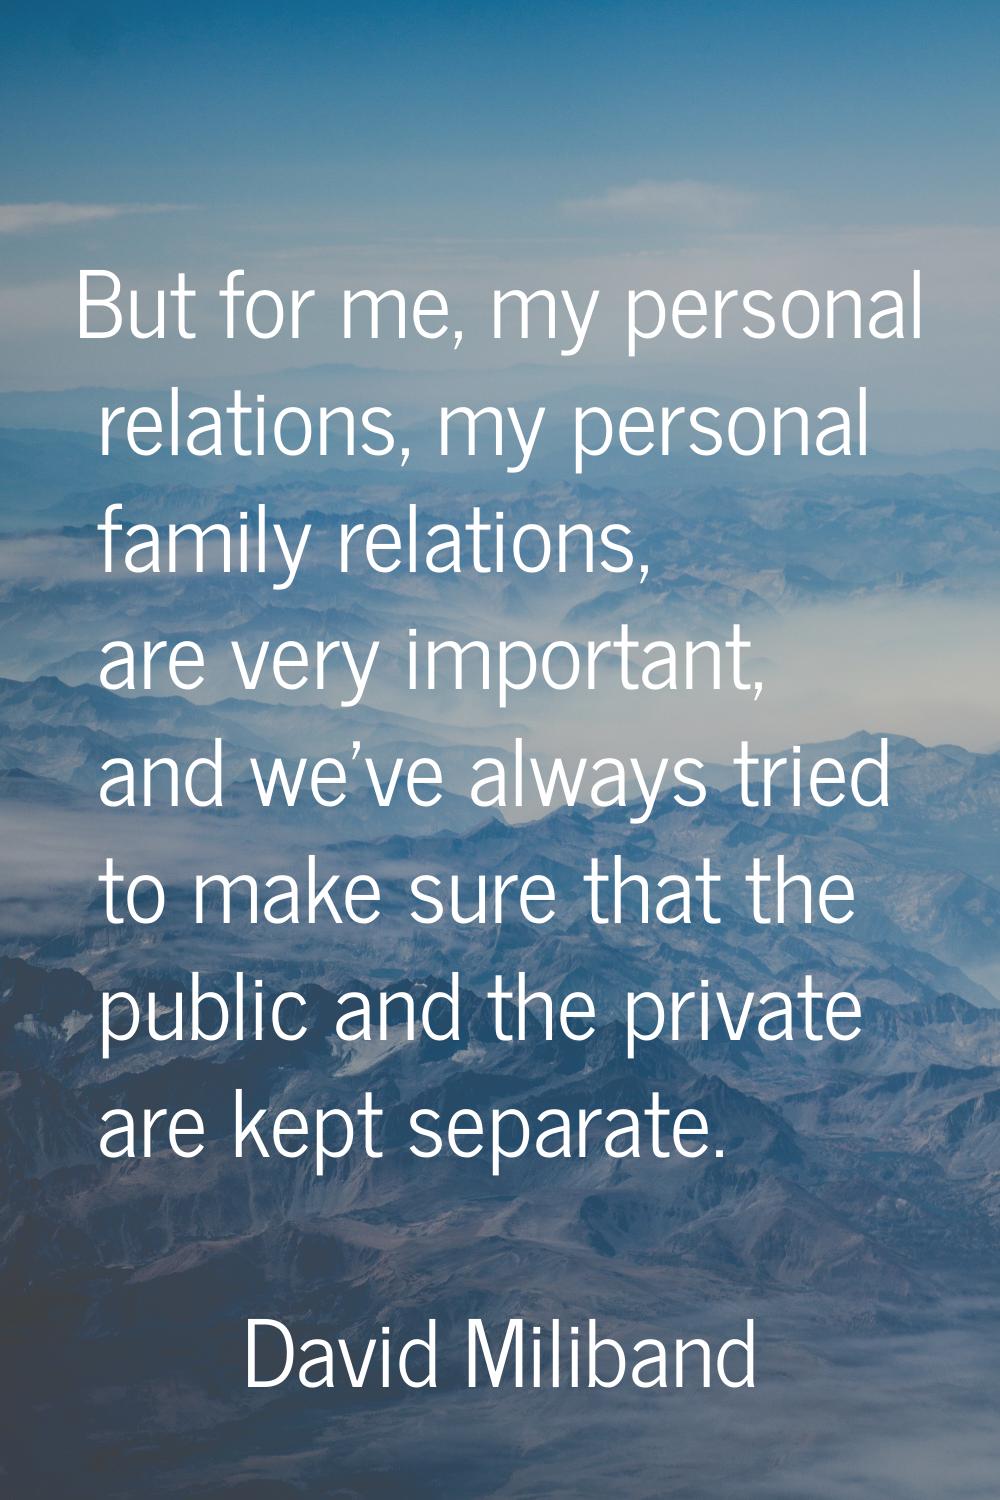 But for me, my personal relations, my personal family relations, are very important, and we've alwa